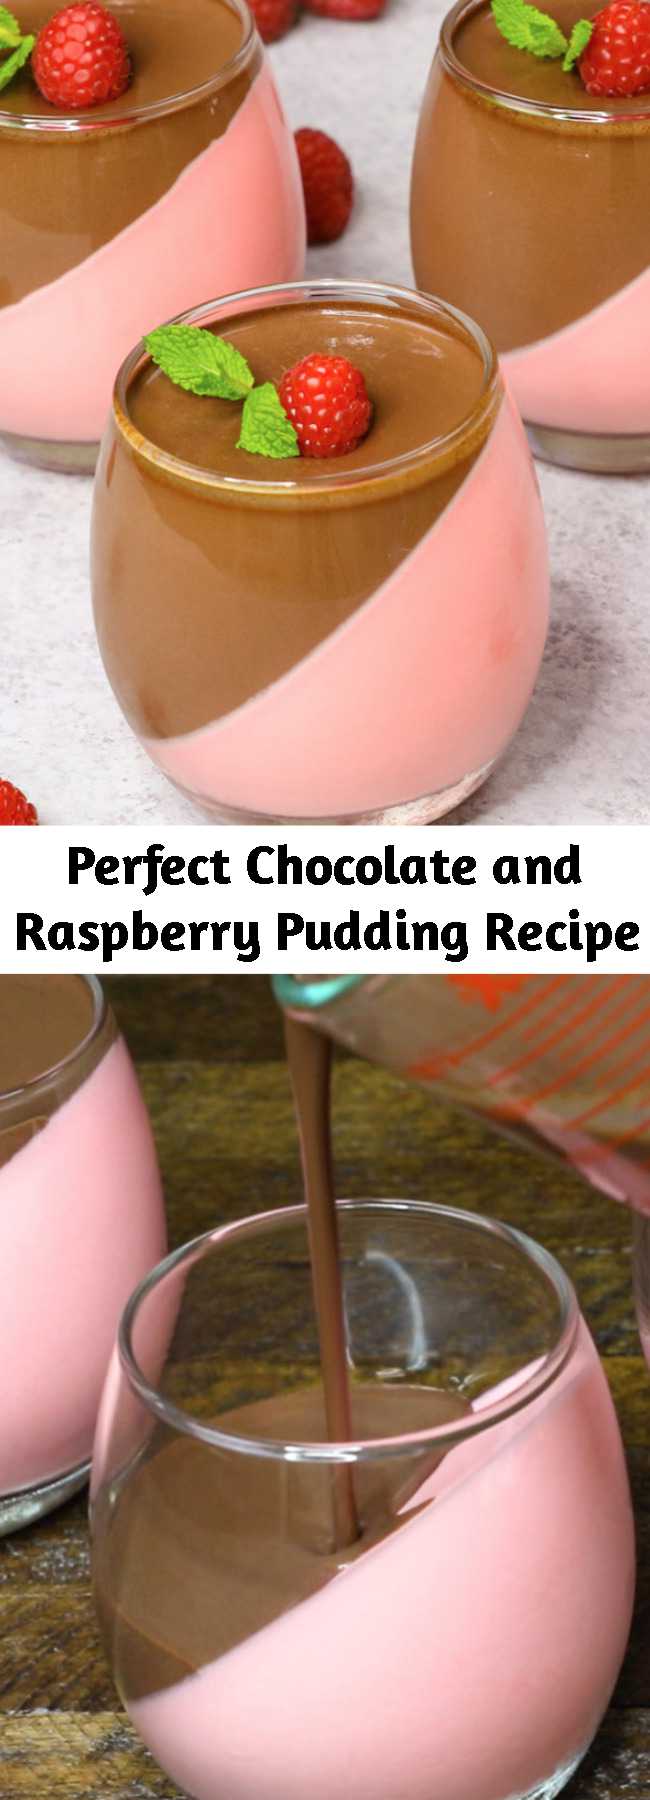 Perfect Chocolate and Raspberry Pudding Recipe - This Homemade Chocolate Pudding is a stunning make-ahead mouthwatering dessert that’s creamy and smooth. It’s an easy recipe with a few simple ingredients: raspberry jello powder, cool whip, half and half milk, gelatin, unsweet chocolate and sugar.